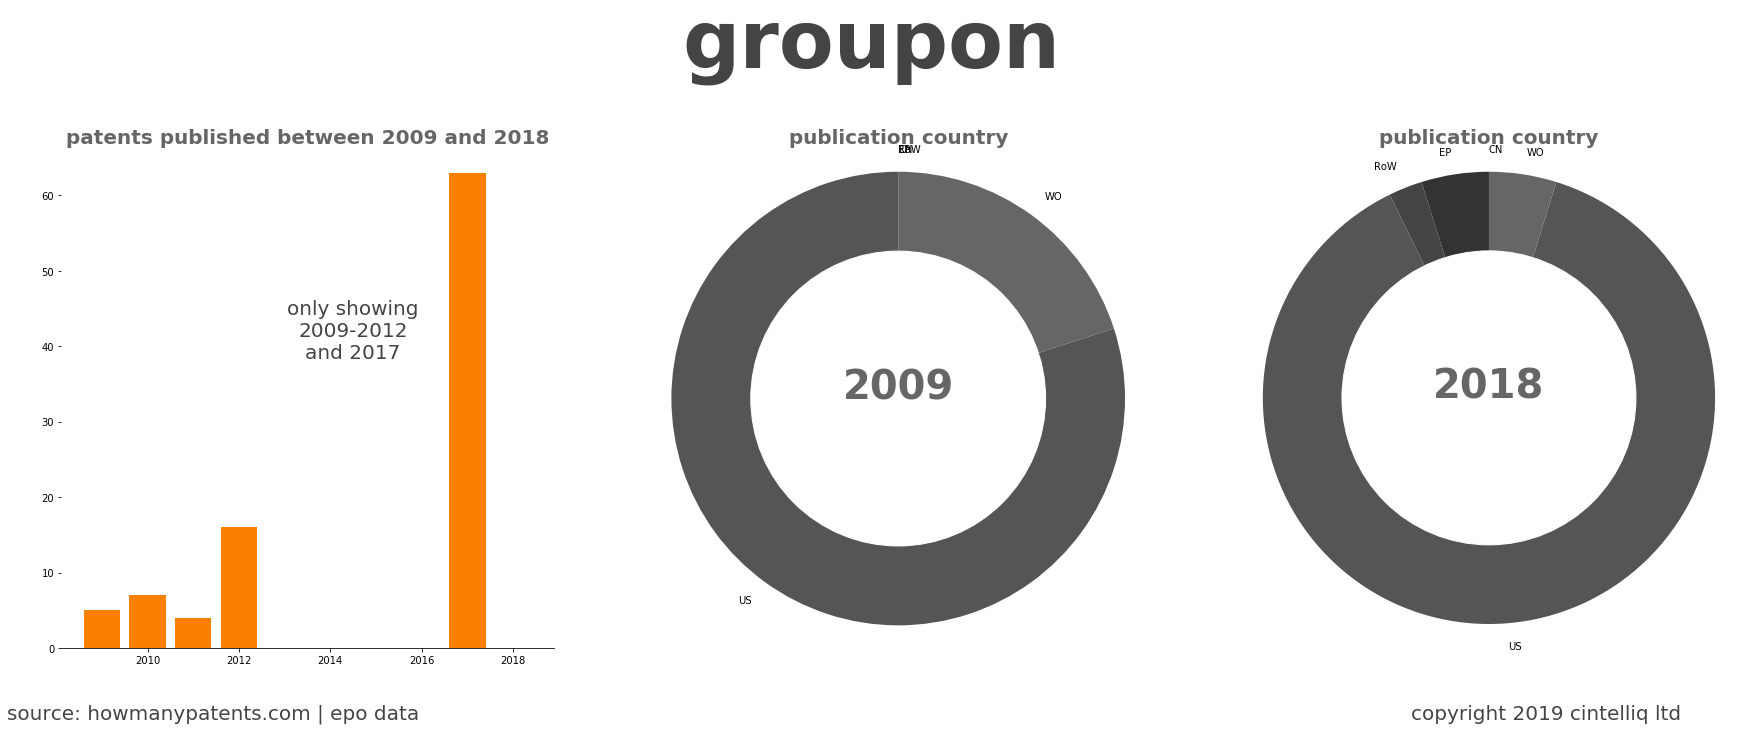 summary of patents for Groupon